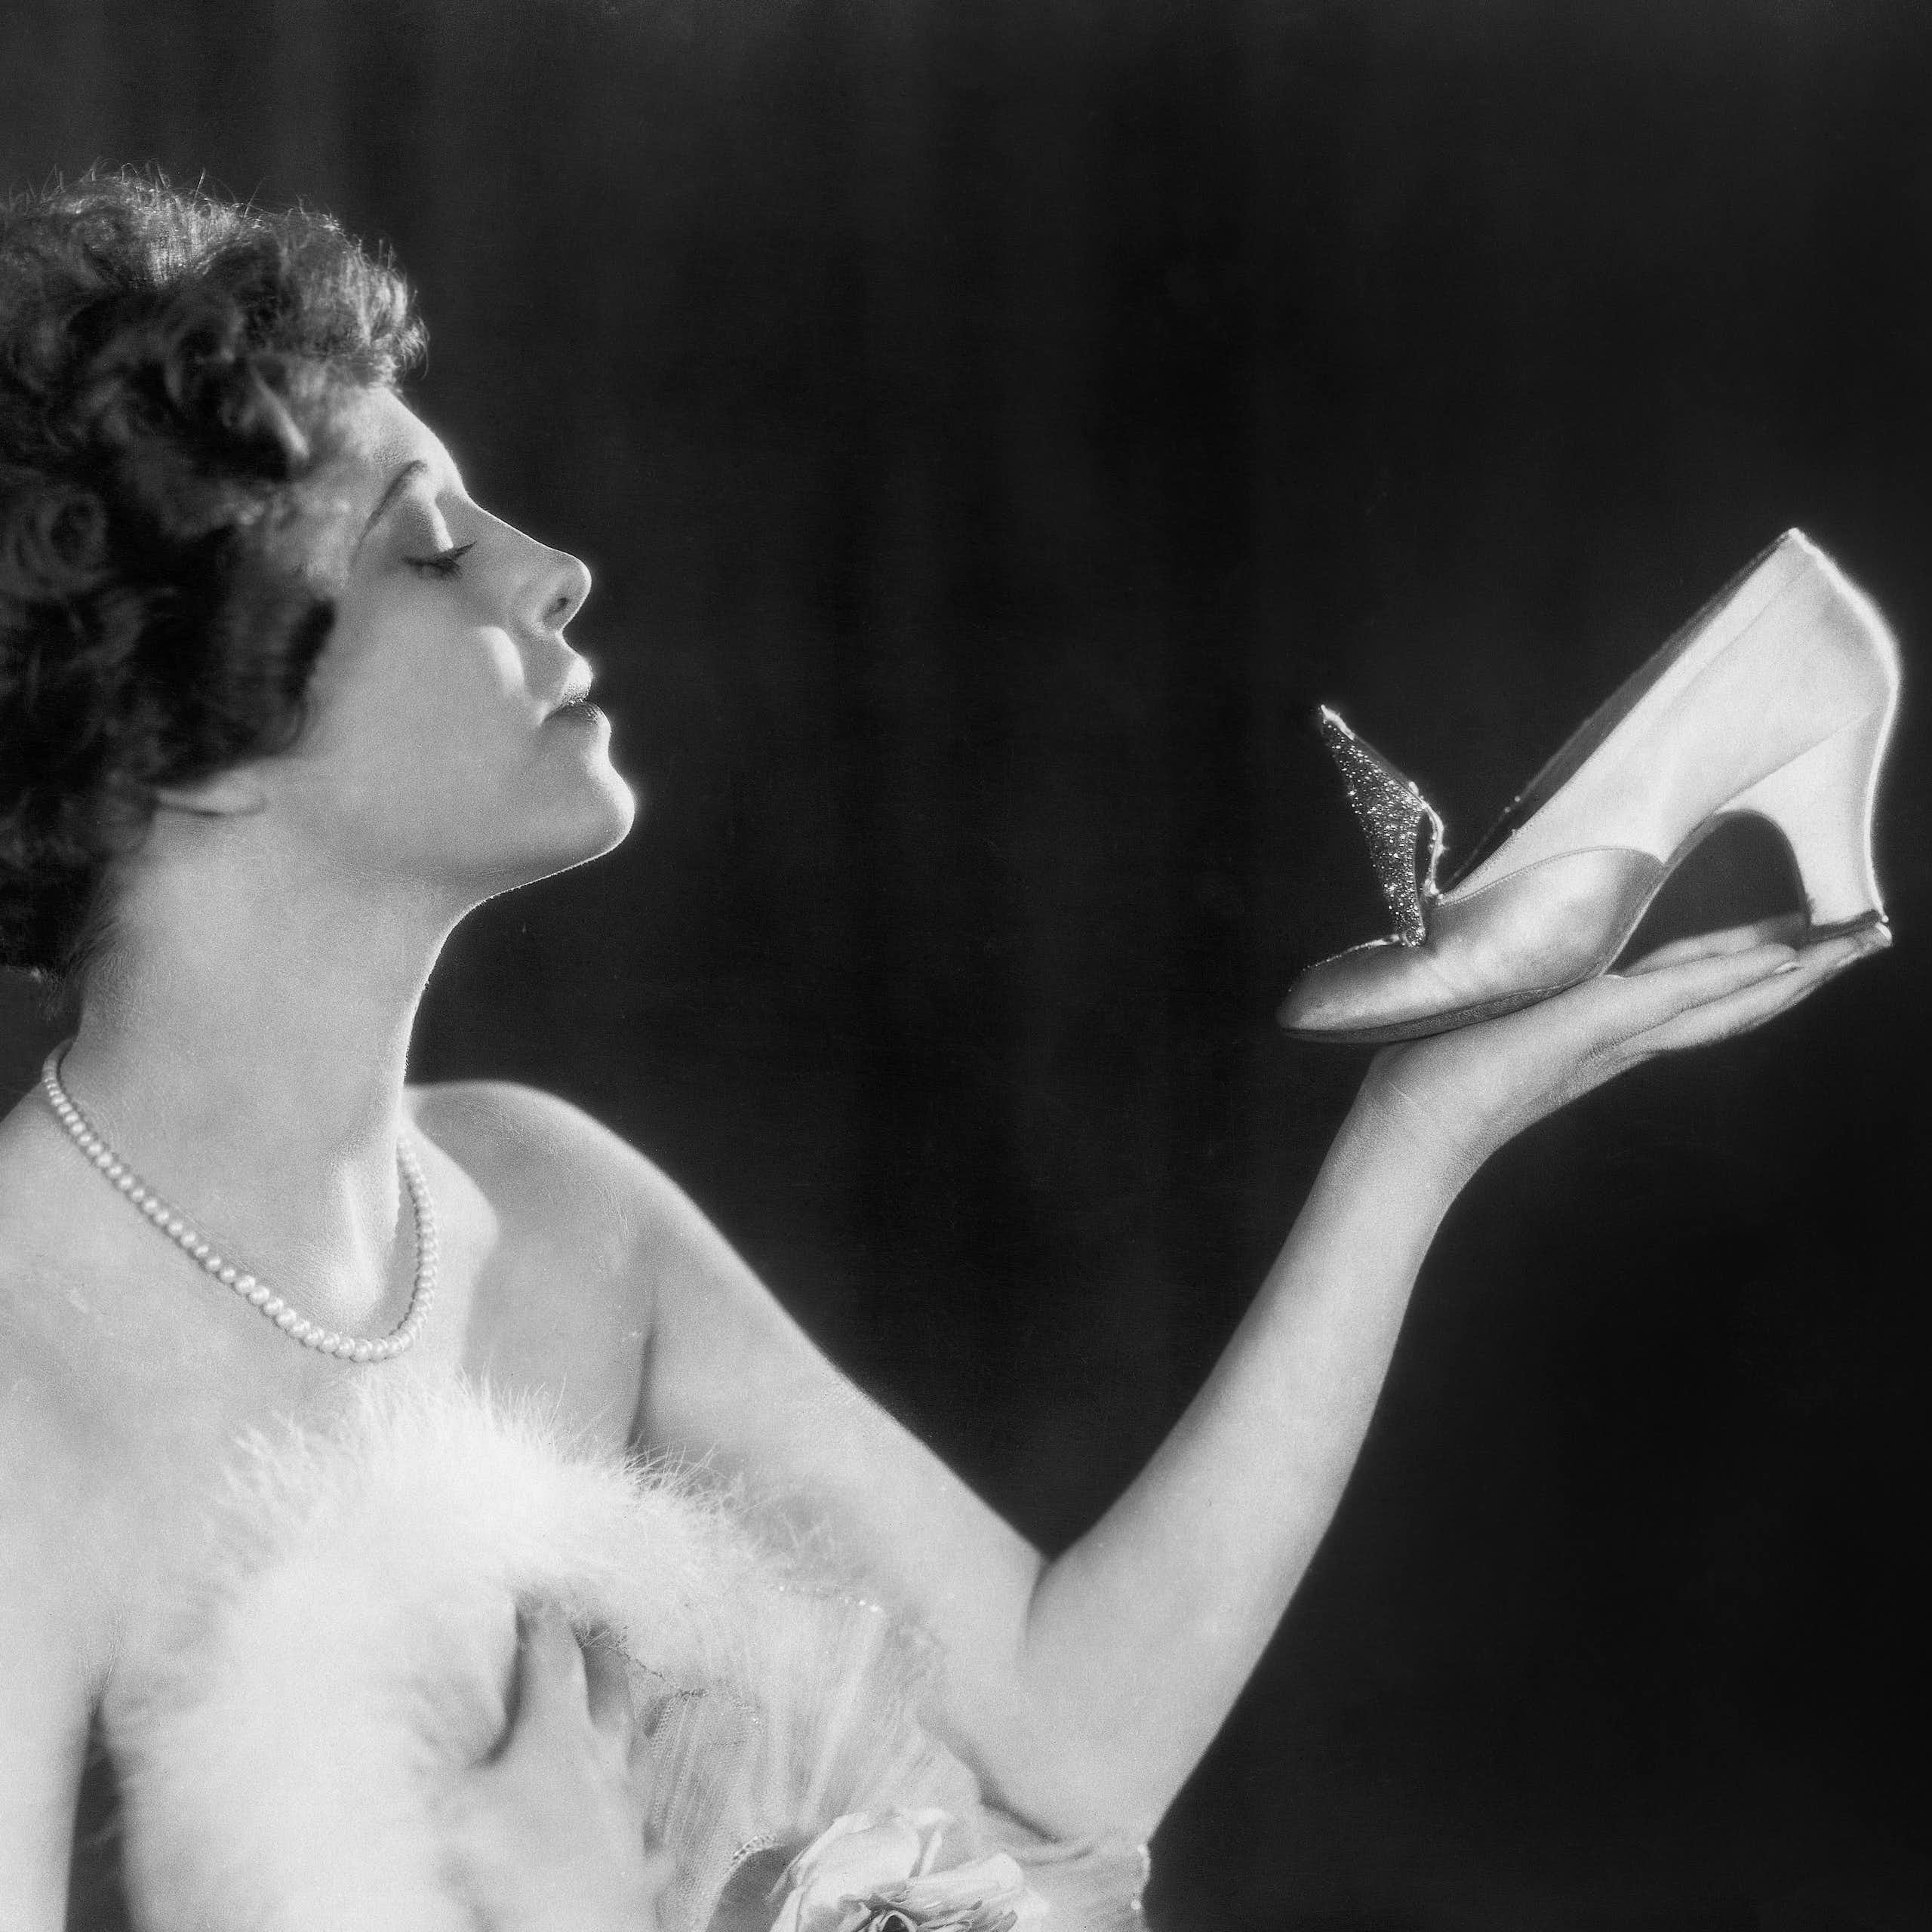 A 1940s woman holds a heeled shoe in one hand while looking at it